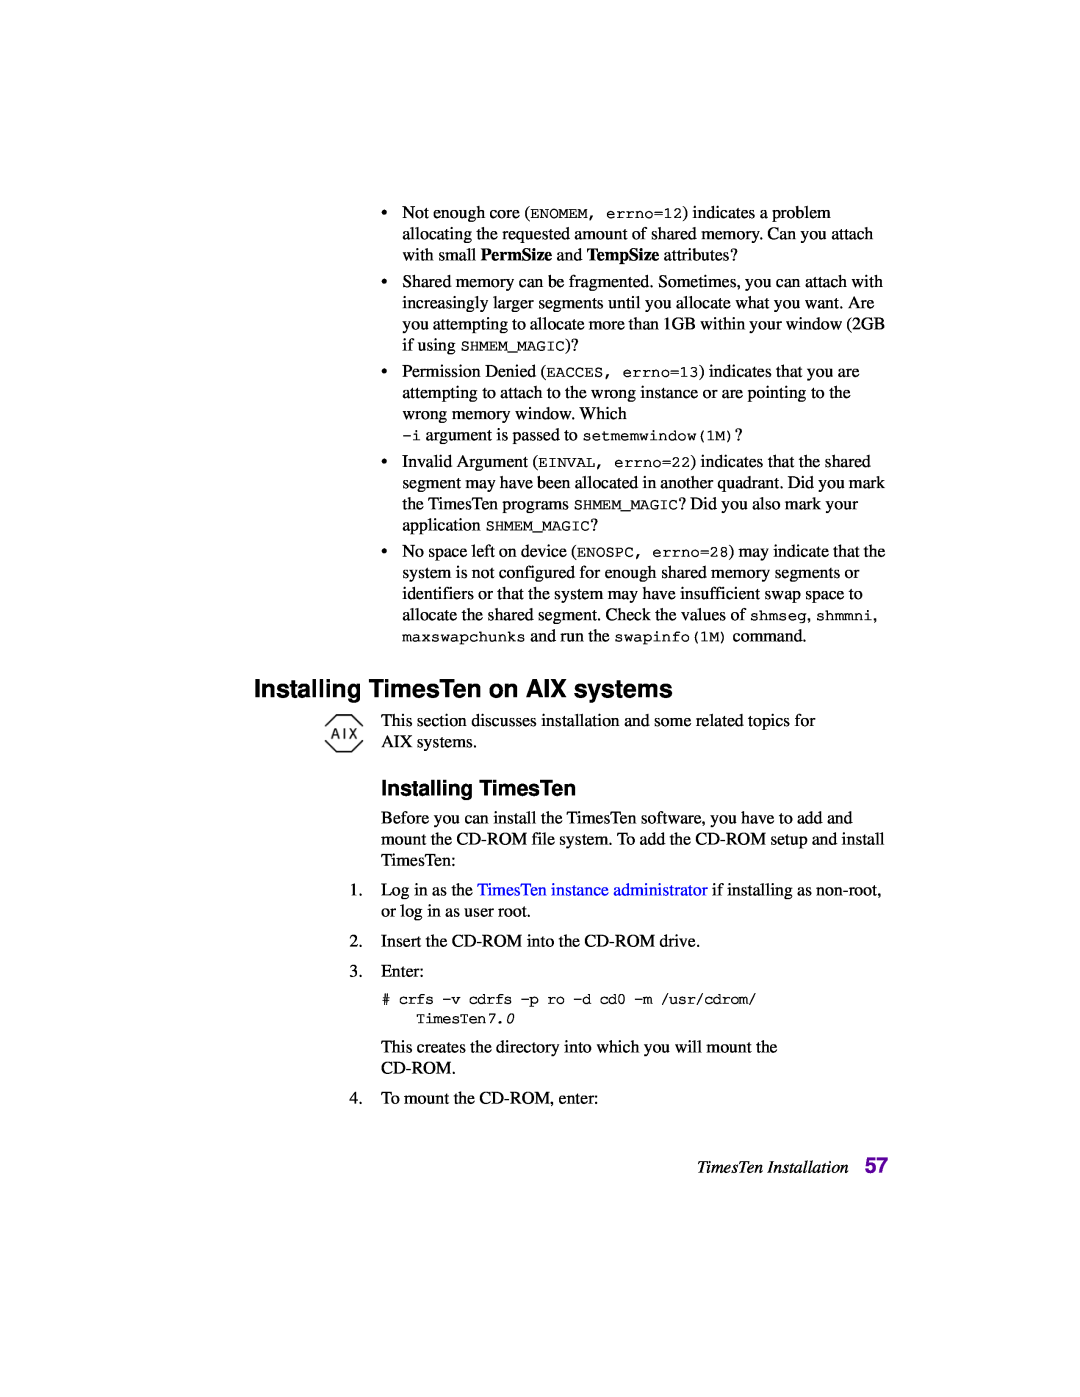 Oracle Audio Technologies B31679-01 manual Installing TimesTen on AIX systems 